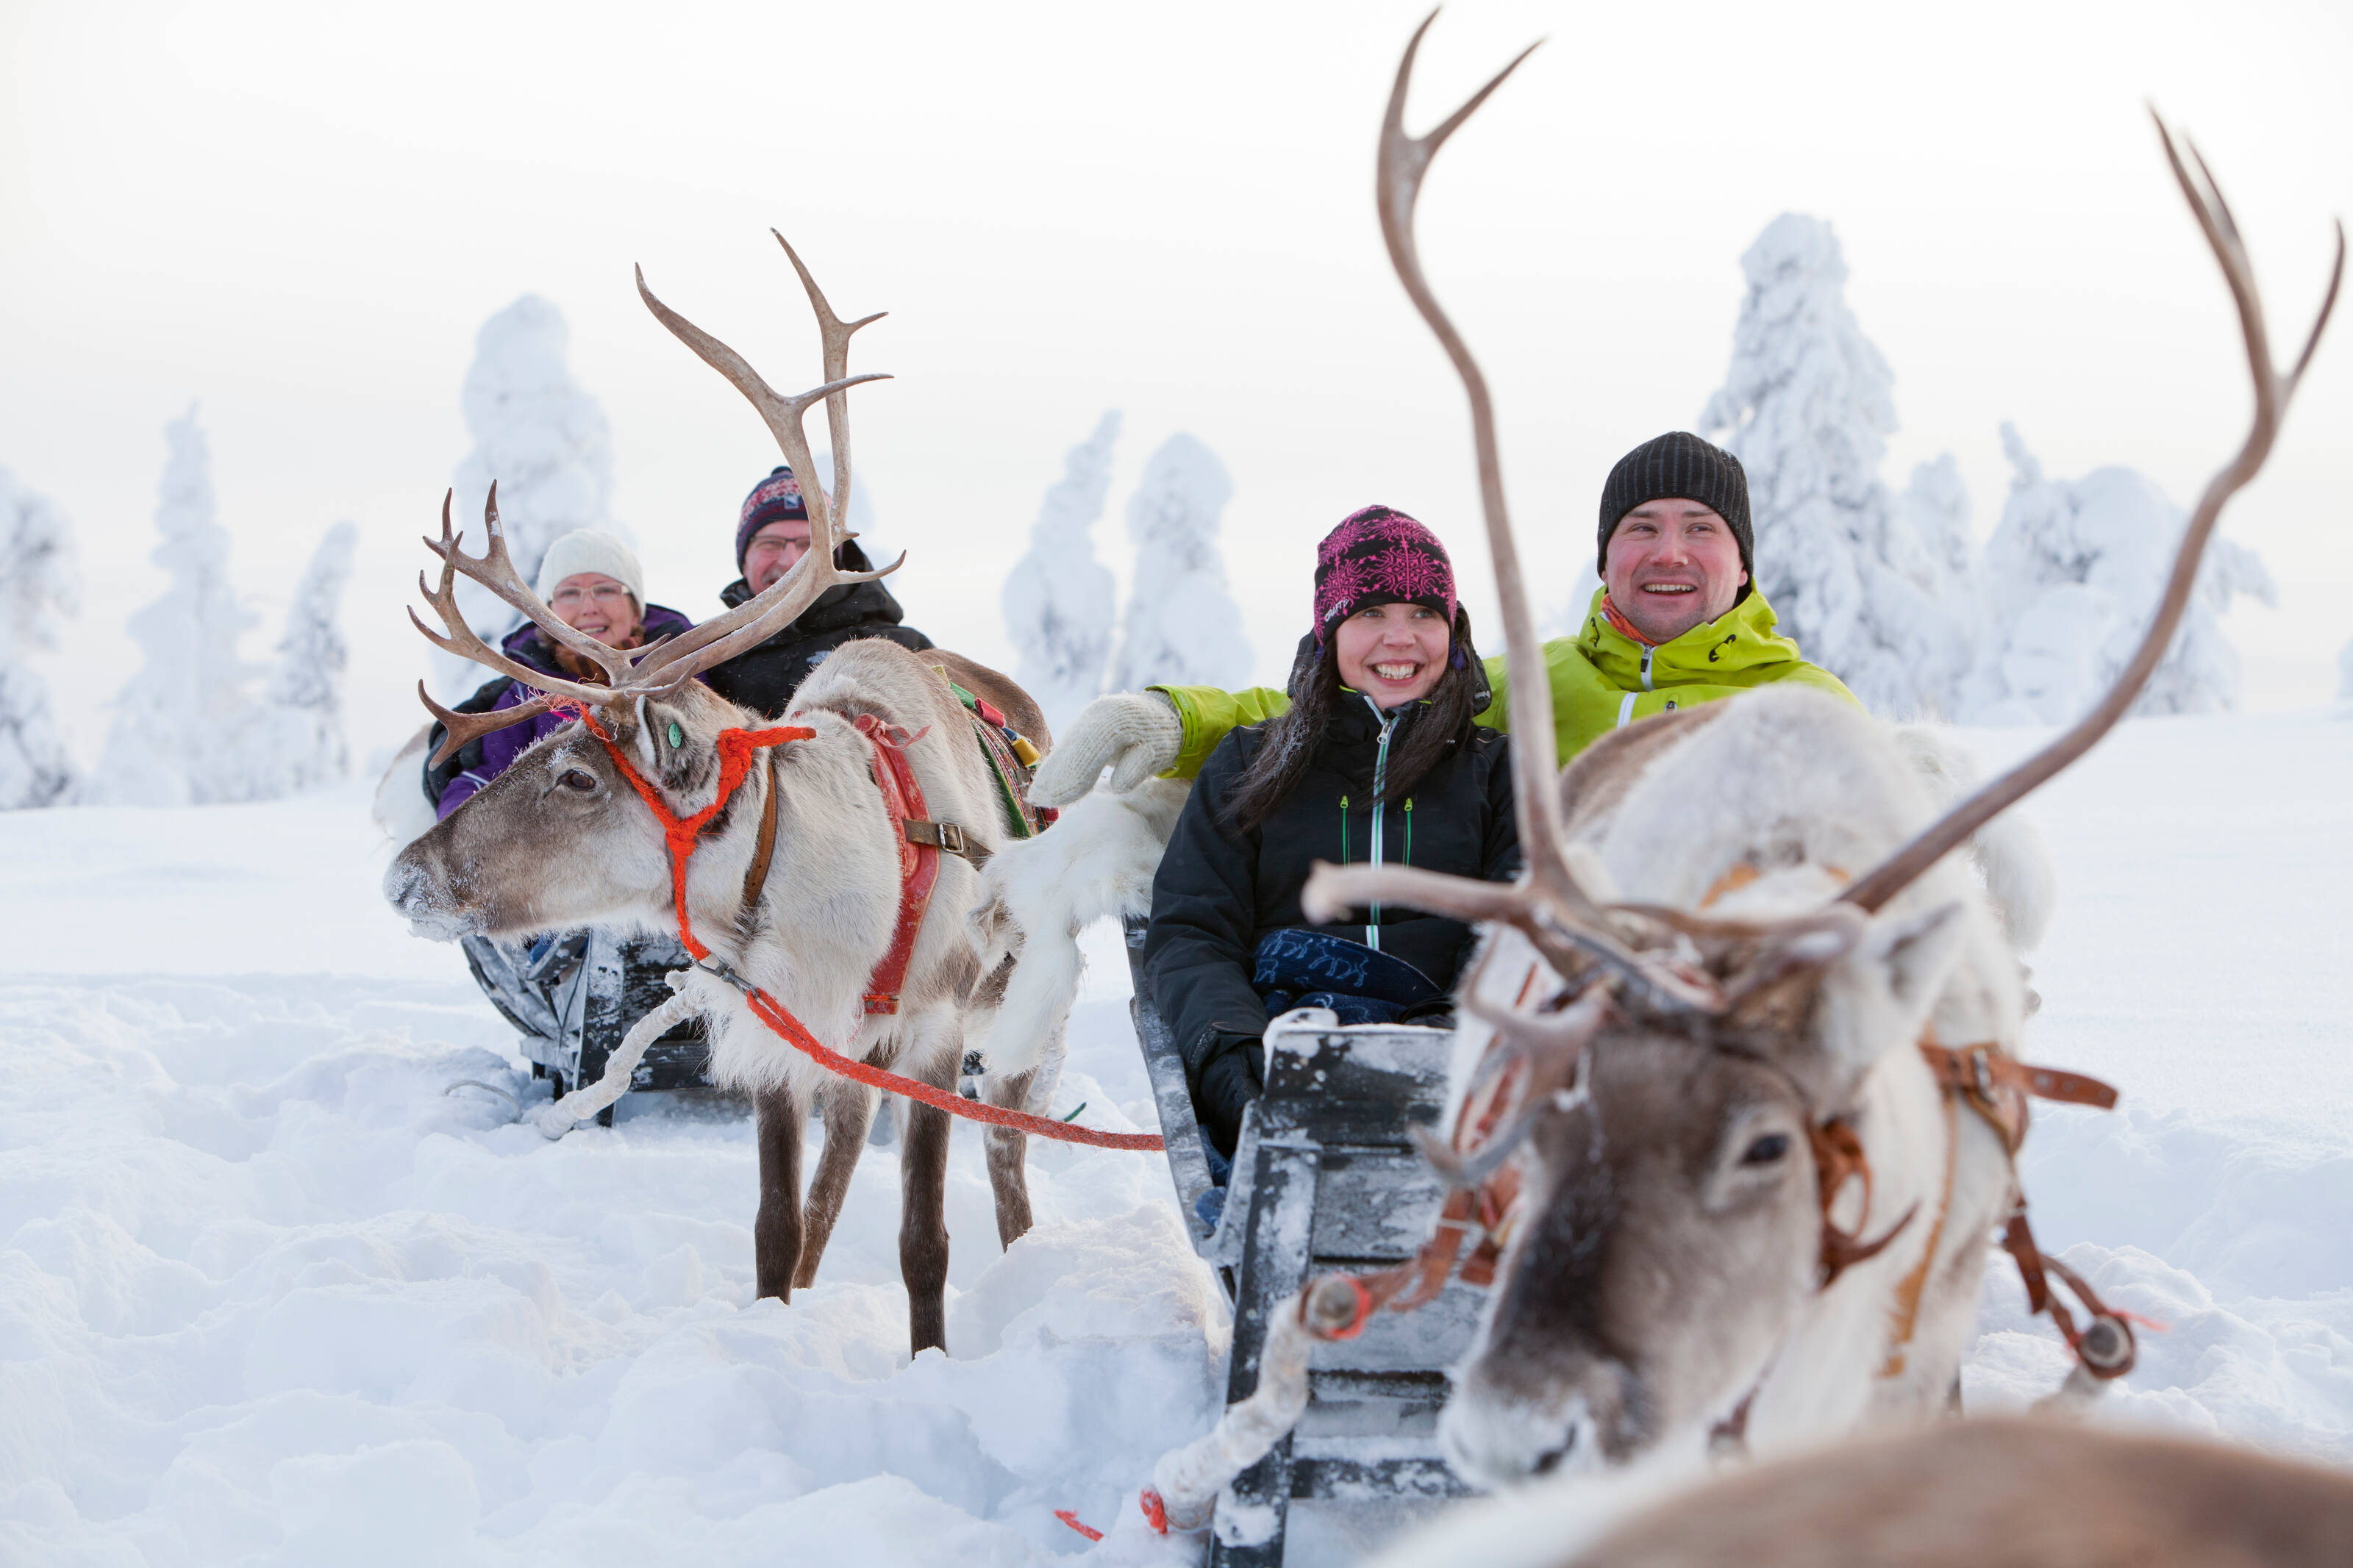 A convoy of reindeer pulls smiling couples in sleds through the snow.